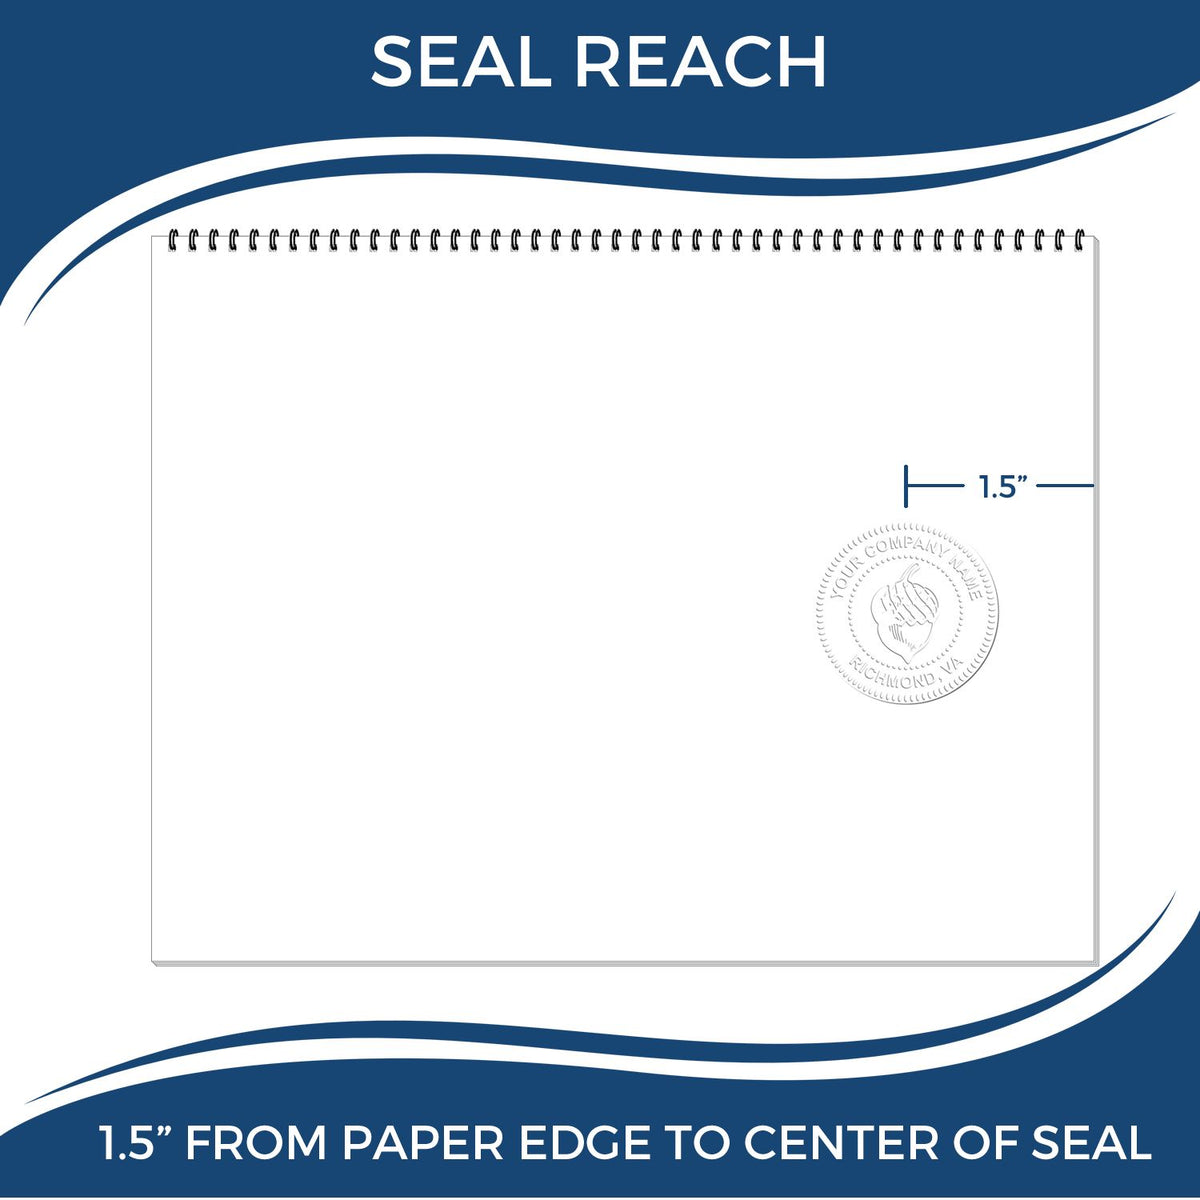 An infographic showing the seal reach which is represented by a ruler and a miniature seal image of the Hybrid New Jersey Architect Seal